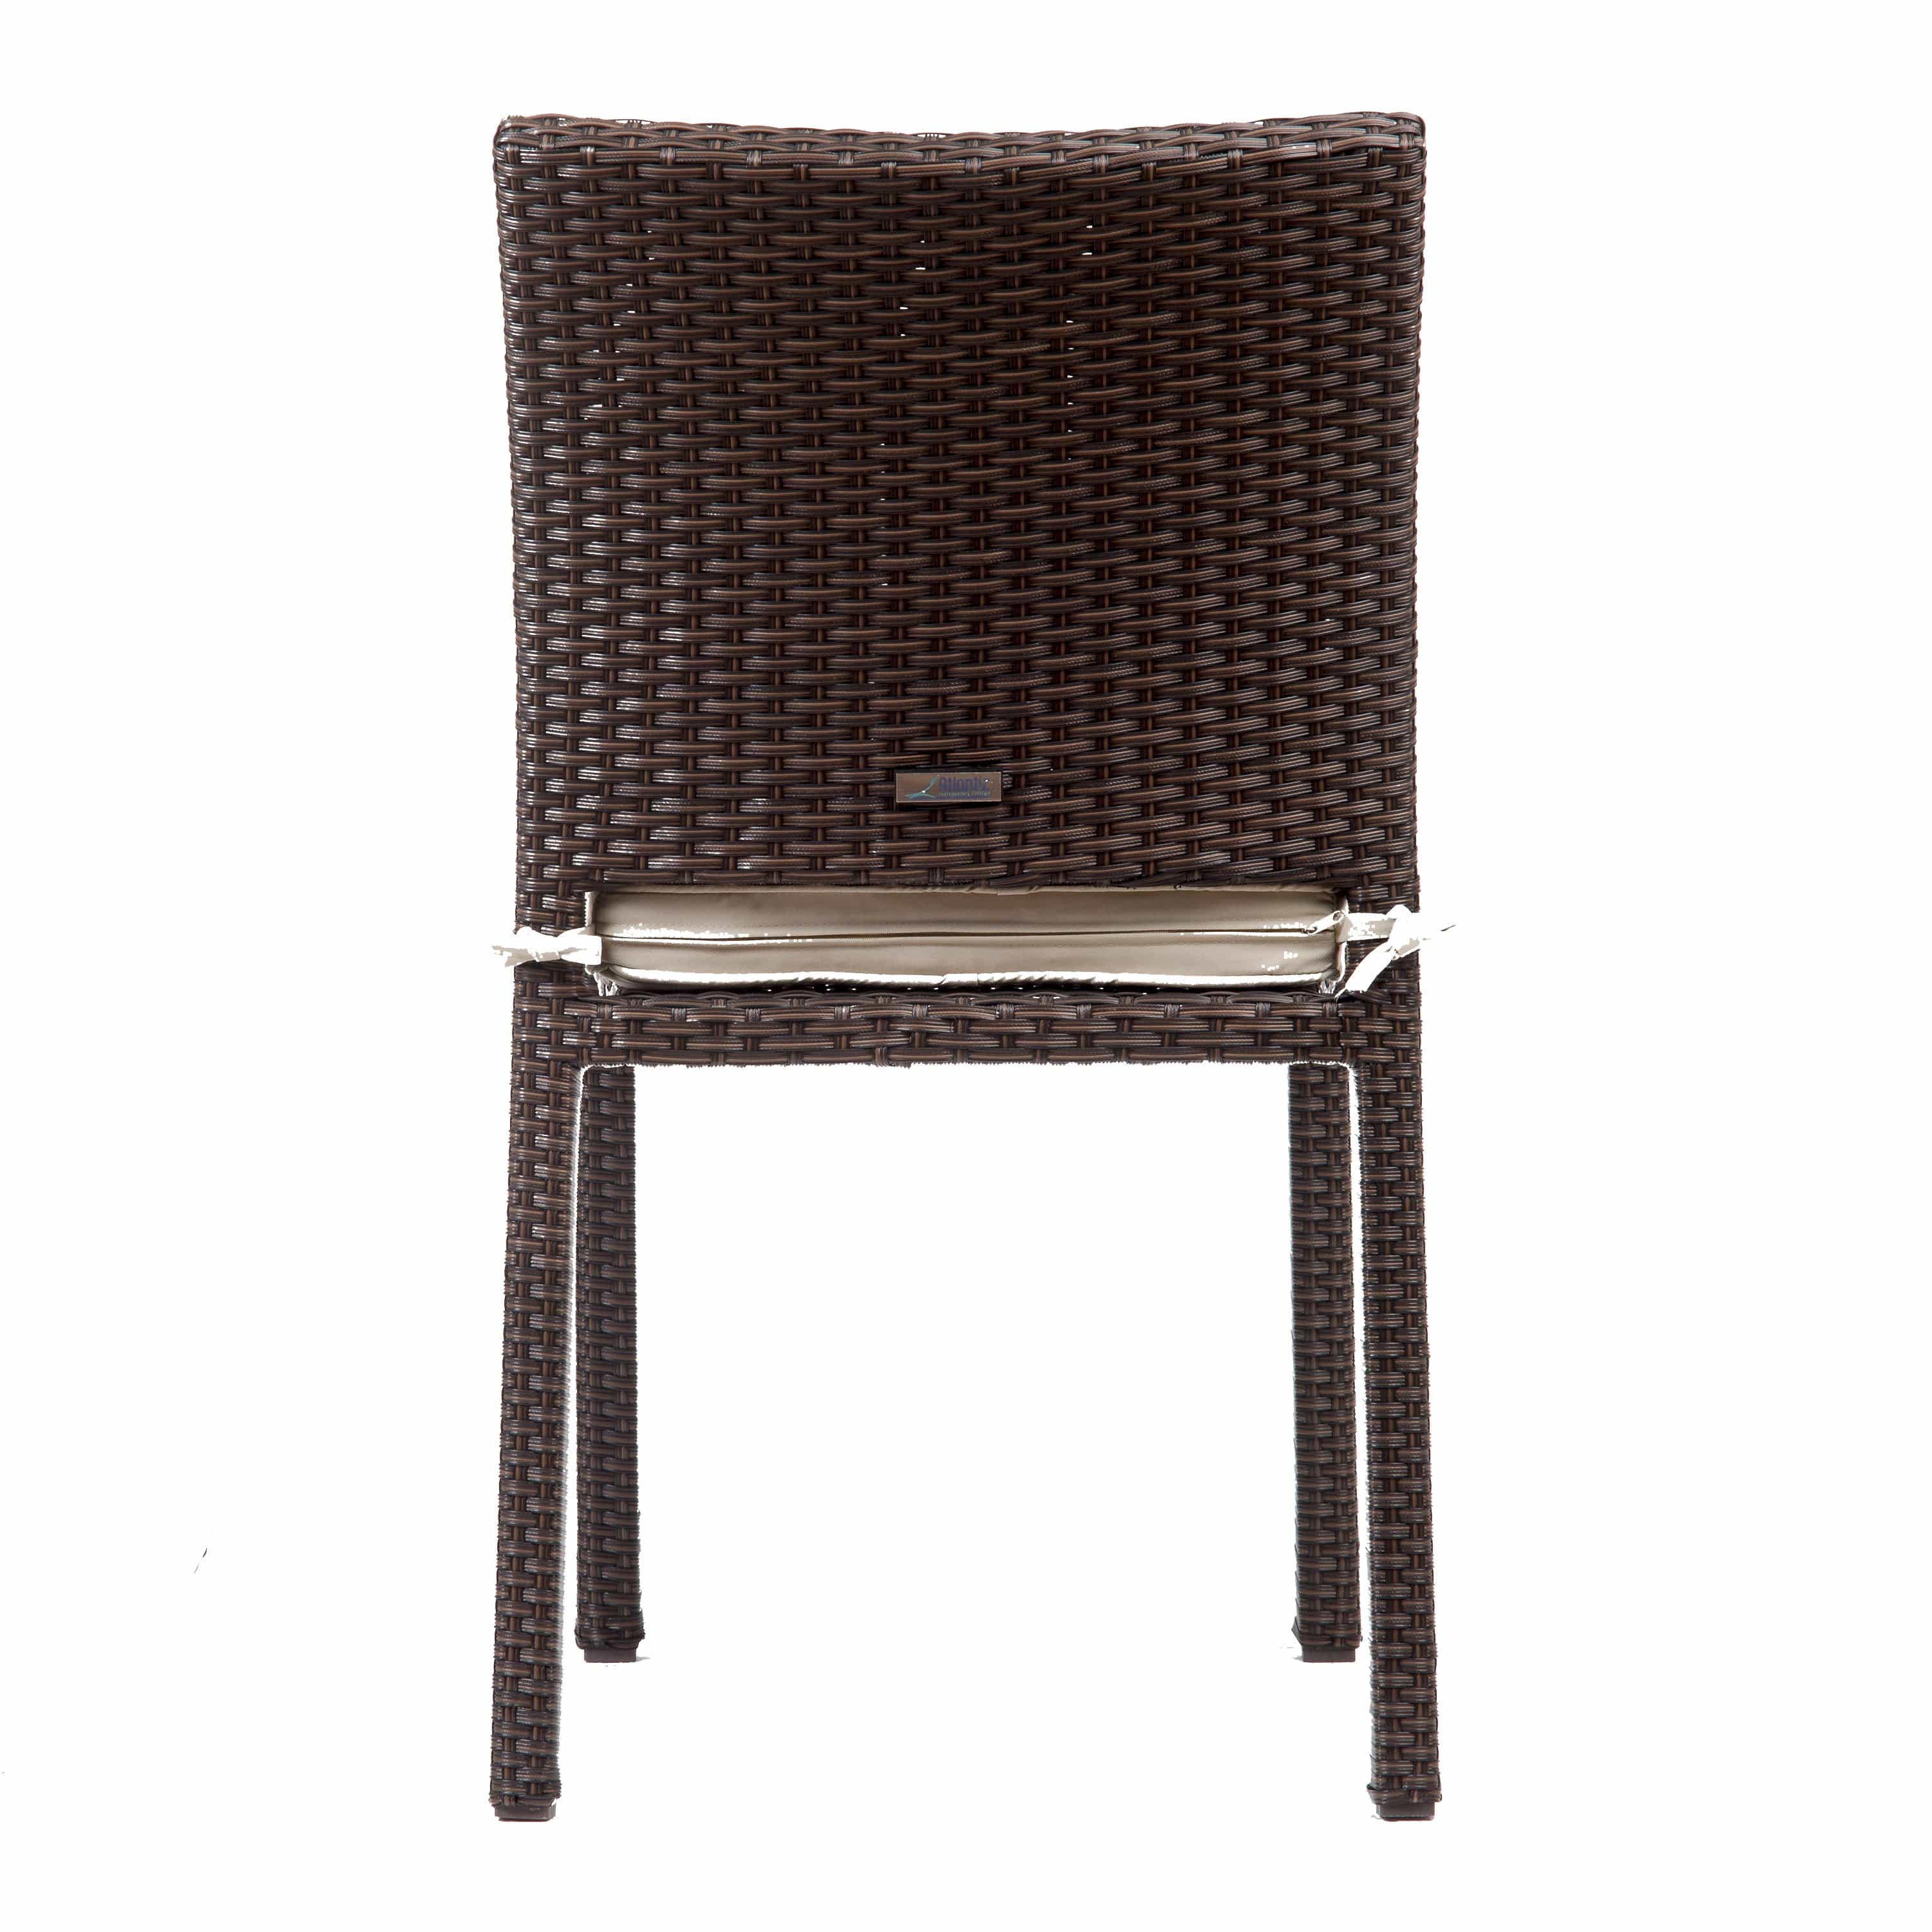 Amazonia Outdoor Teak Dining Set Amazonia Brooklyn 5 Piece Rectangular Eucalyptus Patio Dining set | Teak Finish and Grey Wicker Chairs | Durable and Ideal for Outdoors ORLRECLOT_4LIBSIDEBR